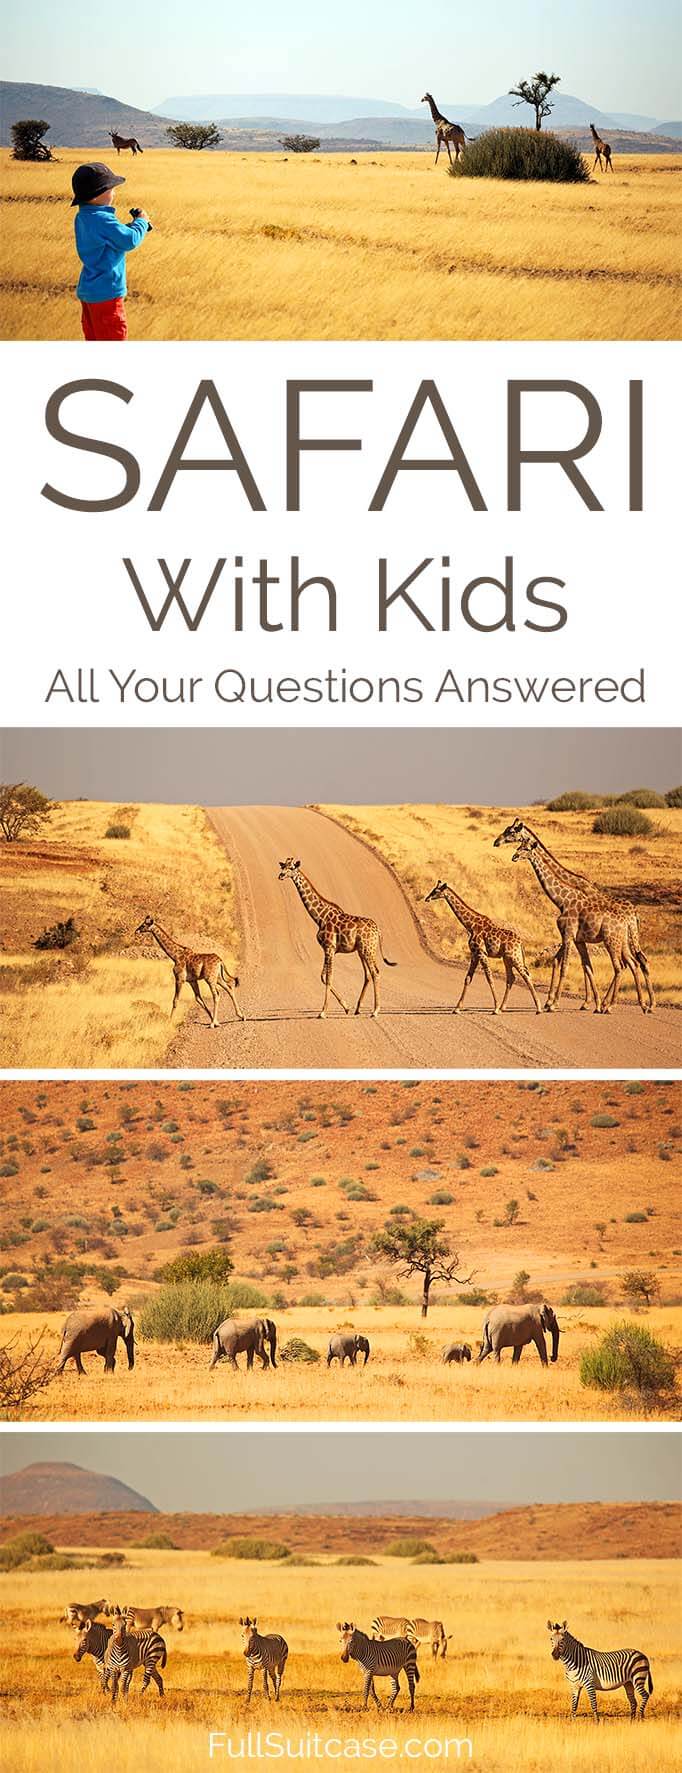 Everything you may want to know about going on an African safari with kids